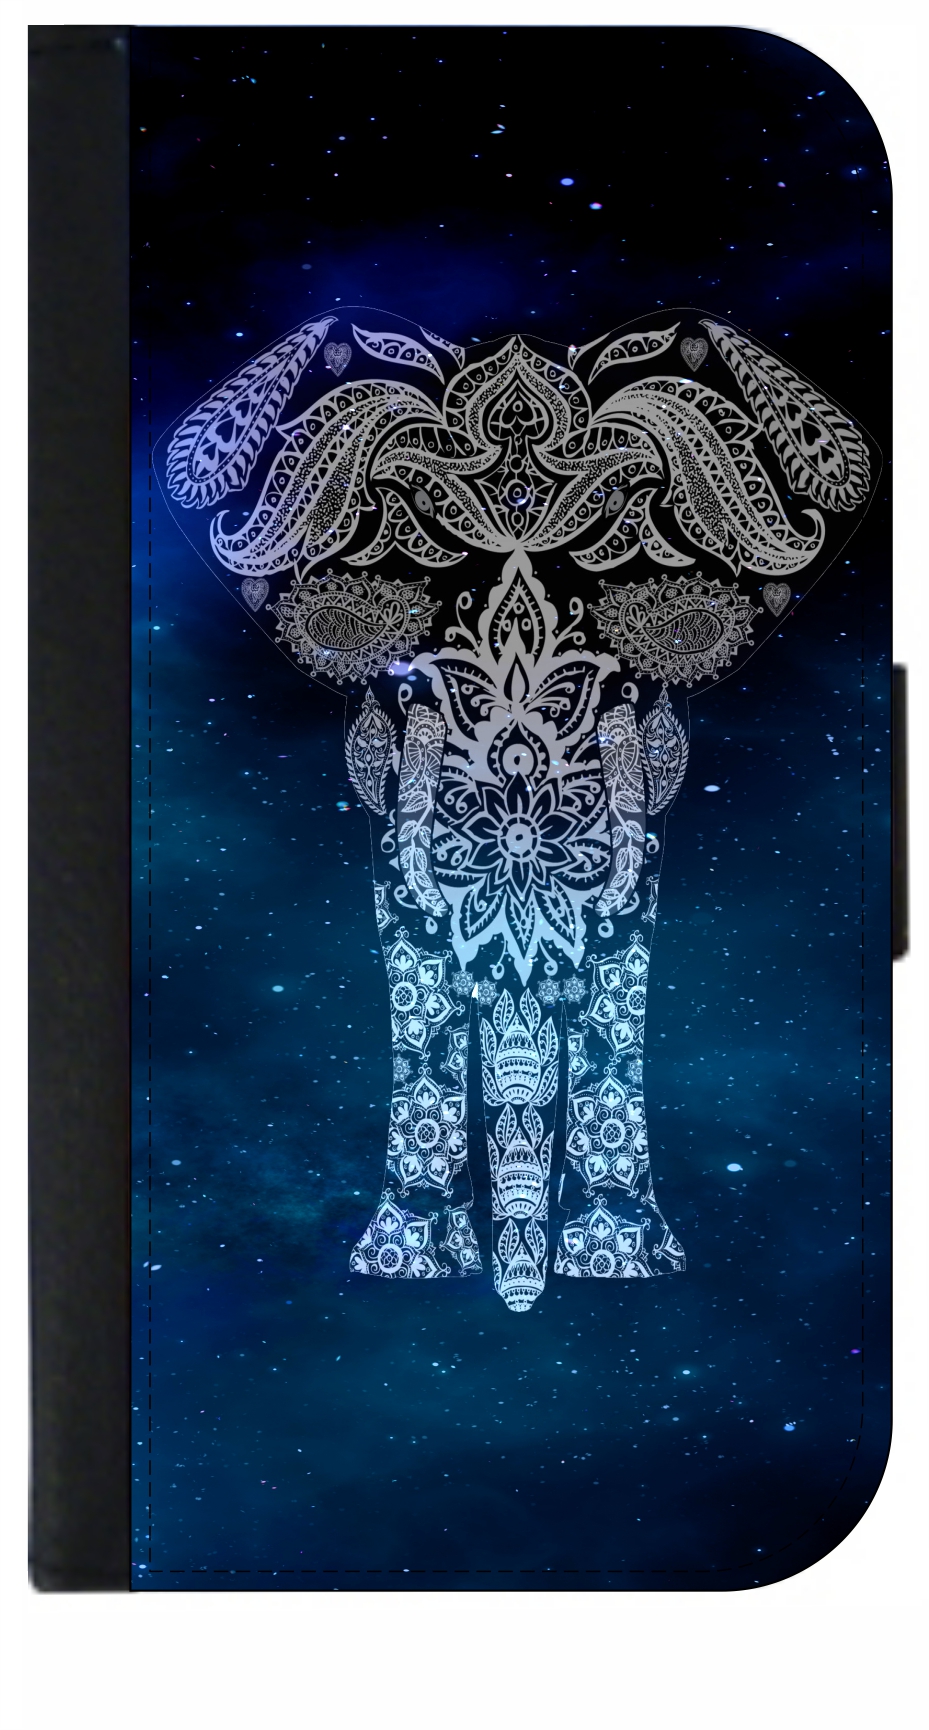 Galactic Elephant - Galaxy s10 Case - s10 Wallet Case - Galaxy s10 Case Leather Impression - Galaxy s10 Case Black - s10 Case Card Holder - image 1 of 3